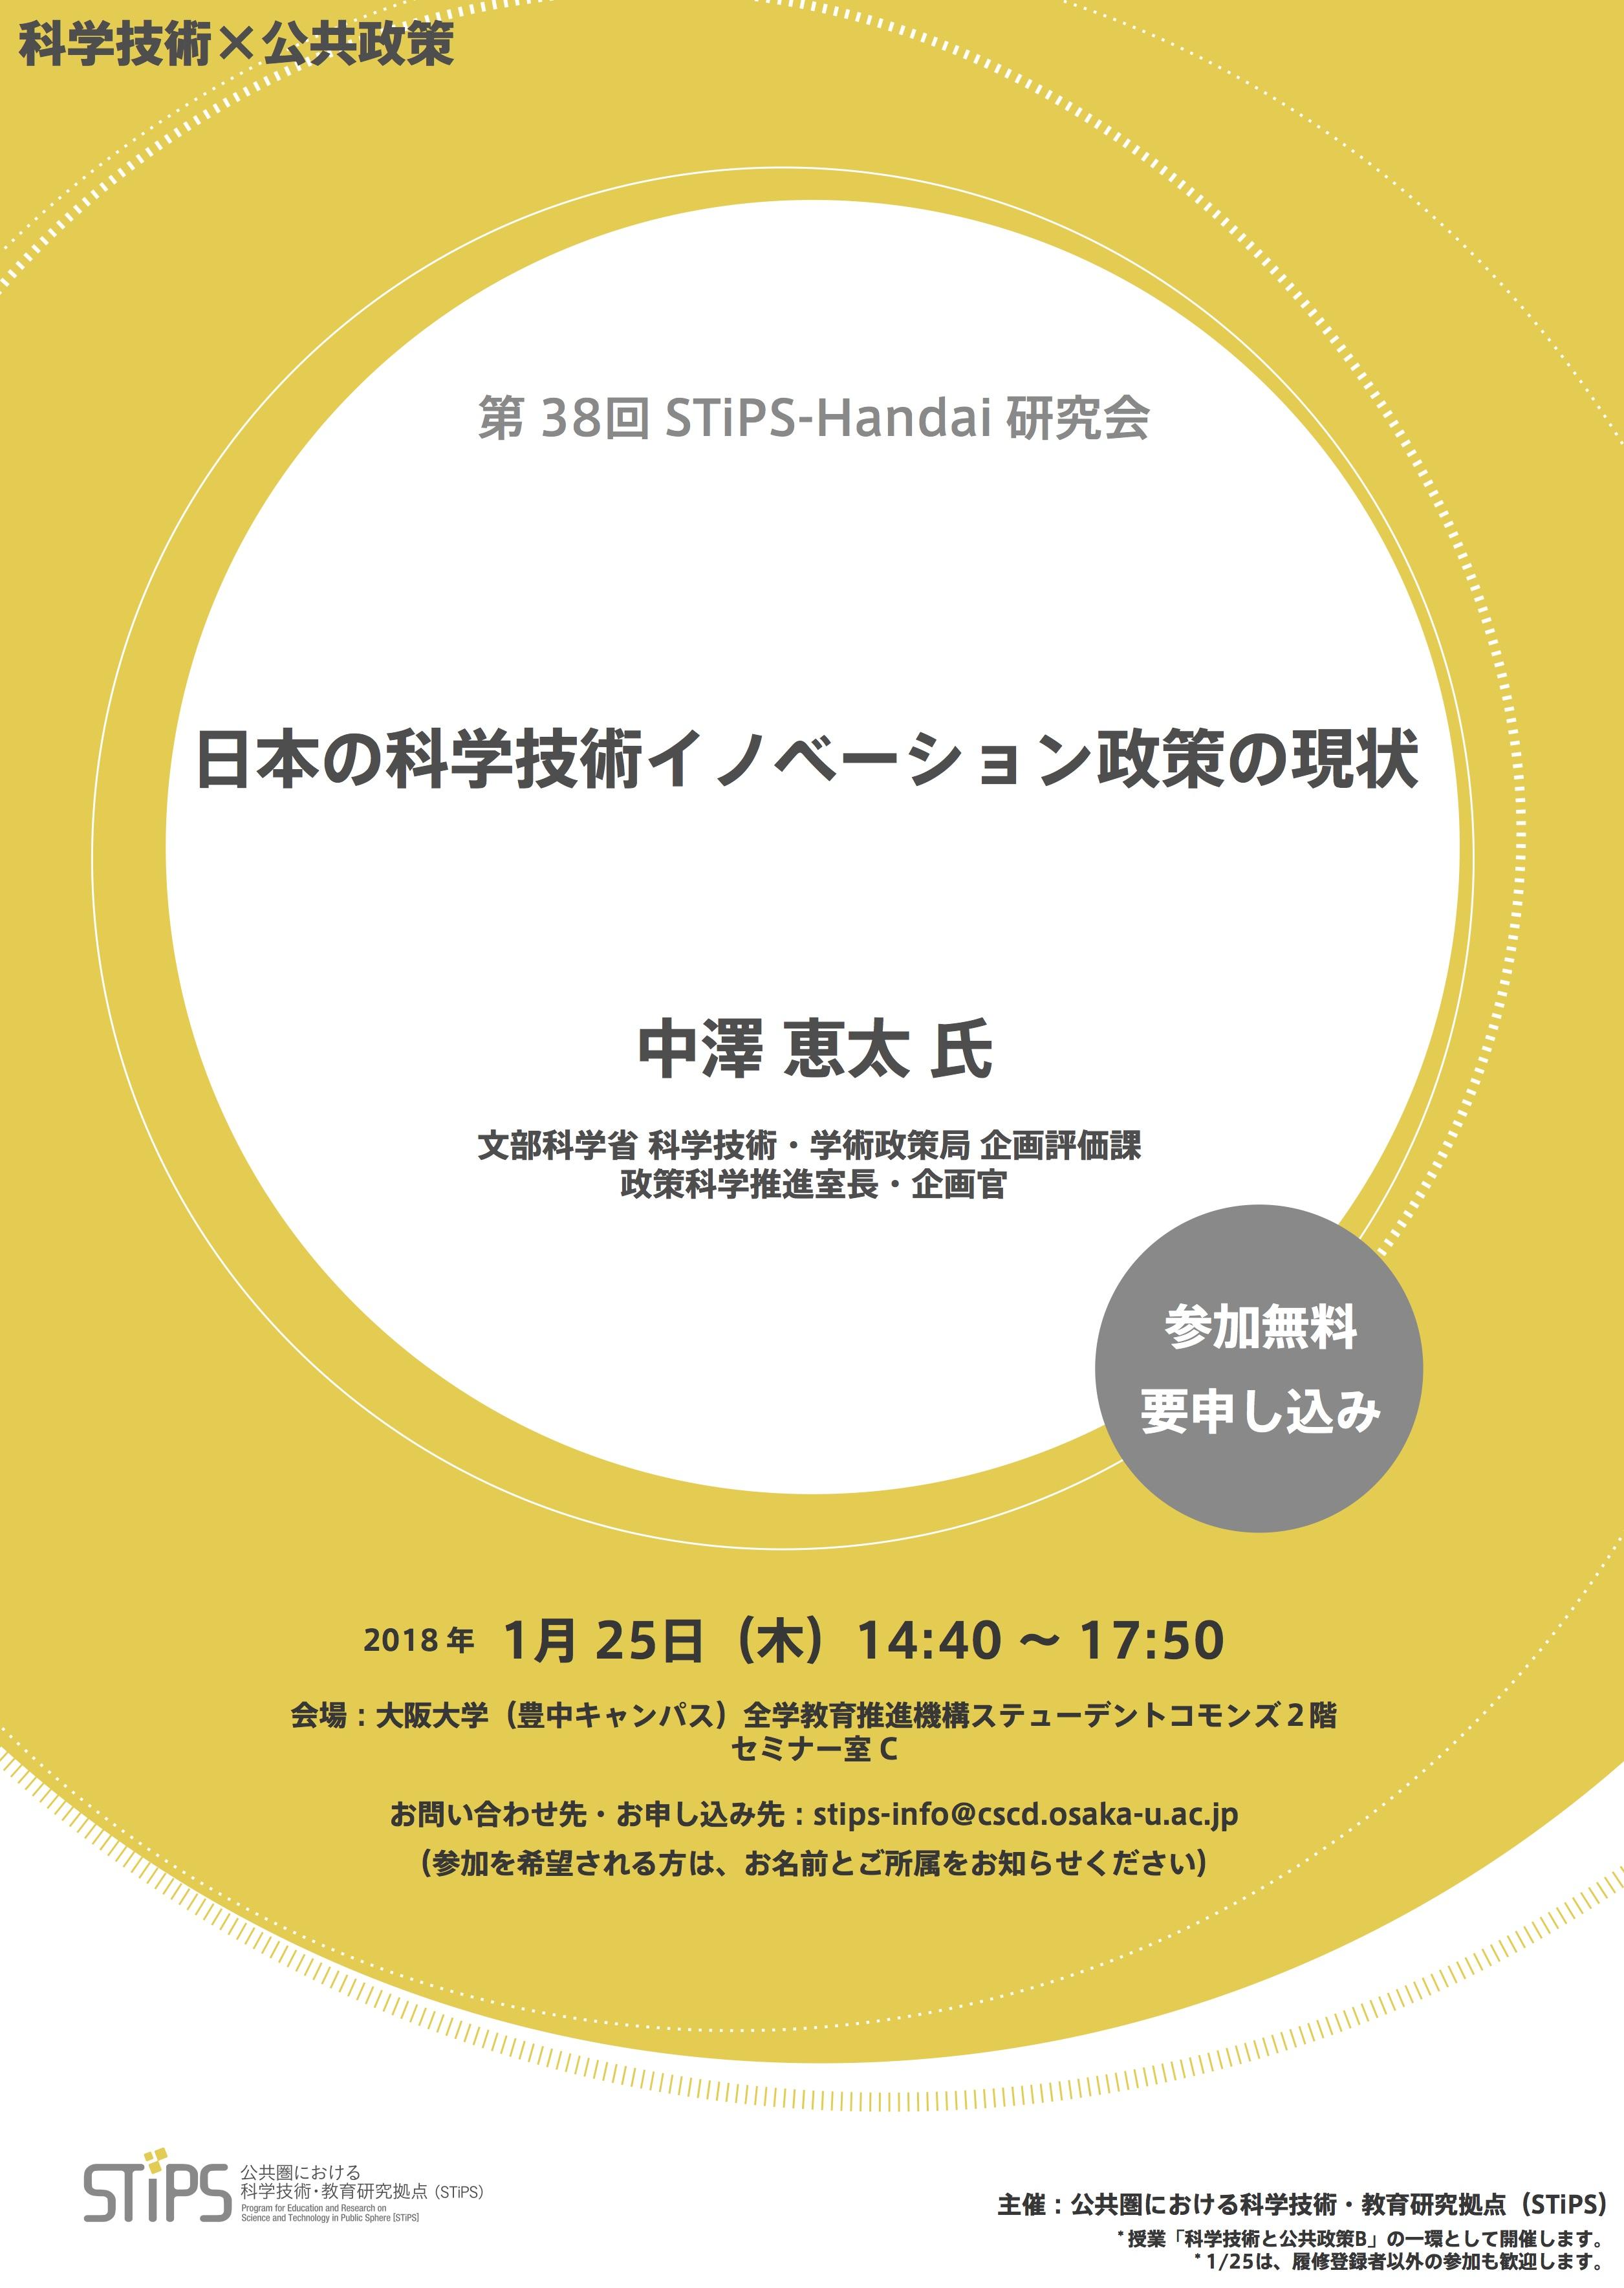 http://scirex.grips.ac.jp/events/Flyer_for180125.jpg